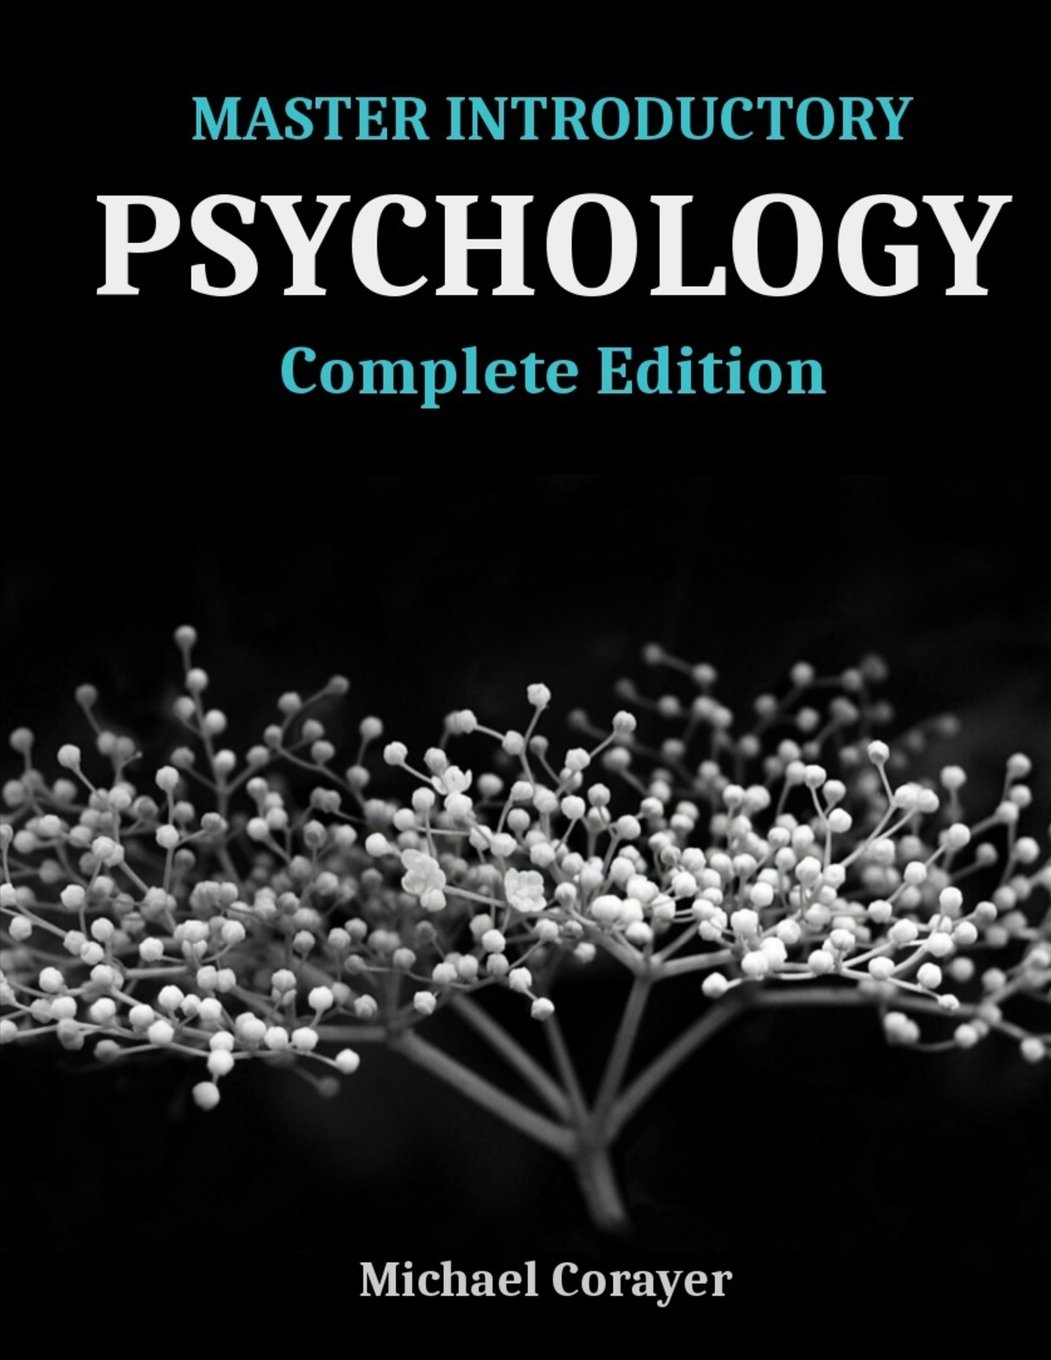 Master Introductory Psychology: Complete Edition